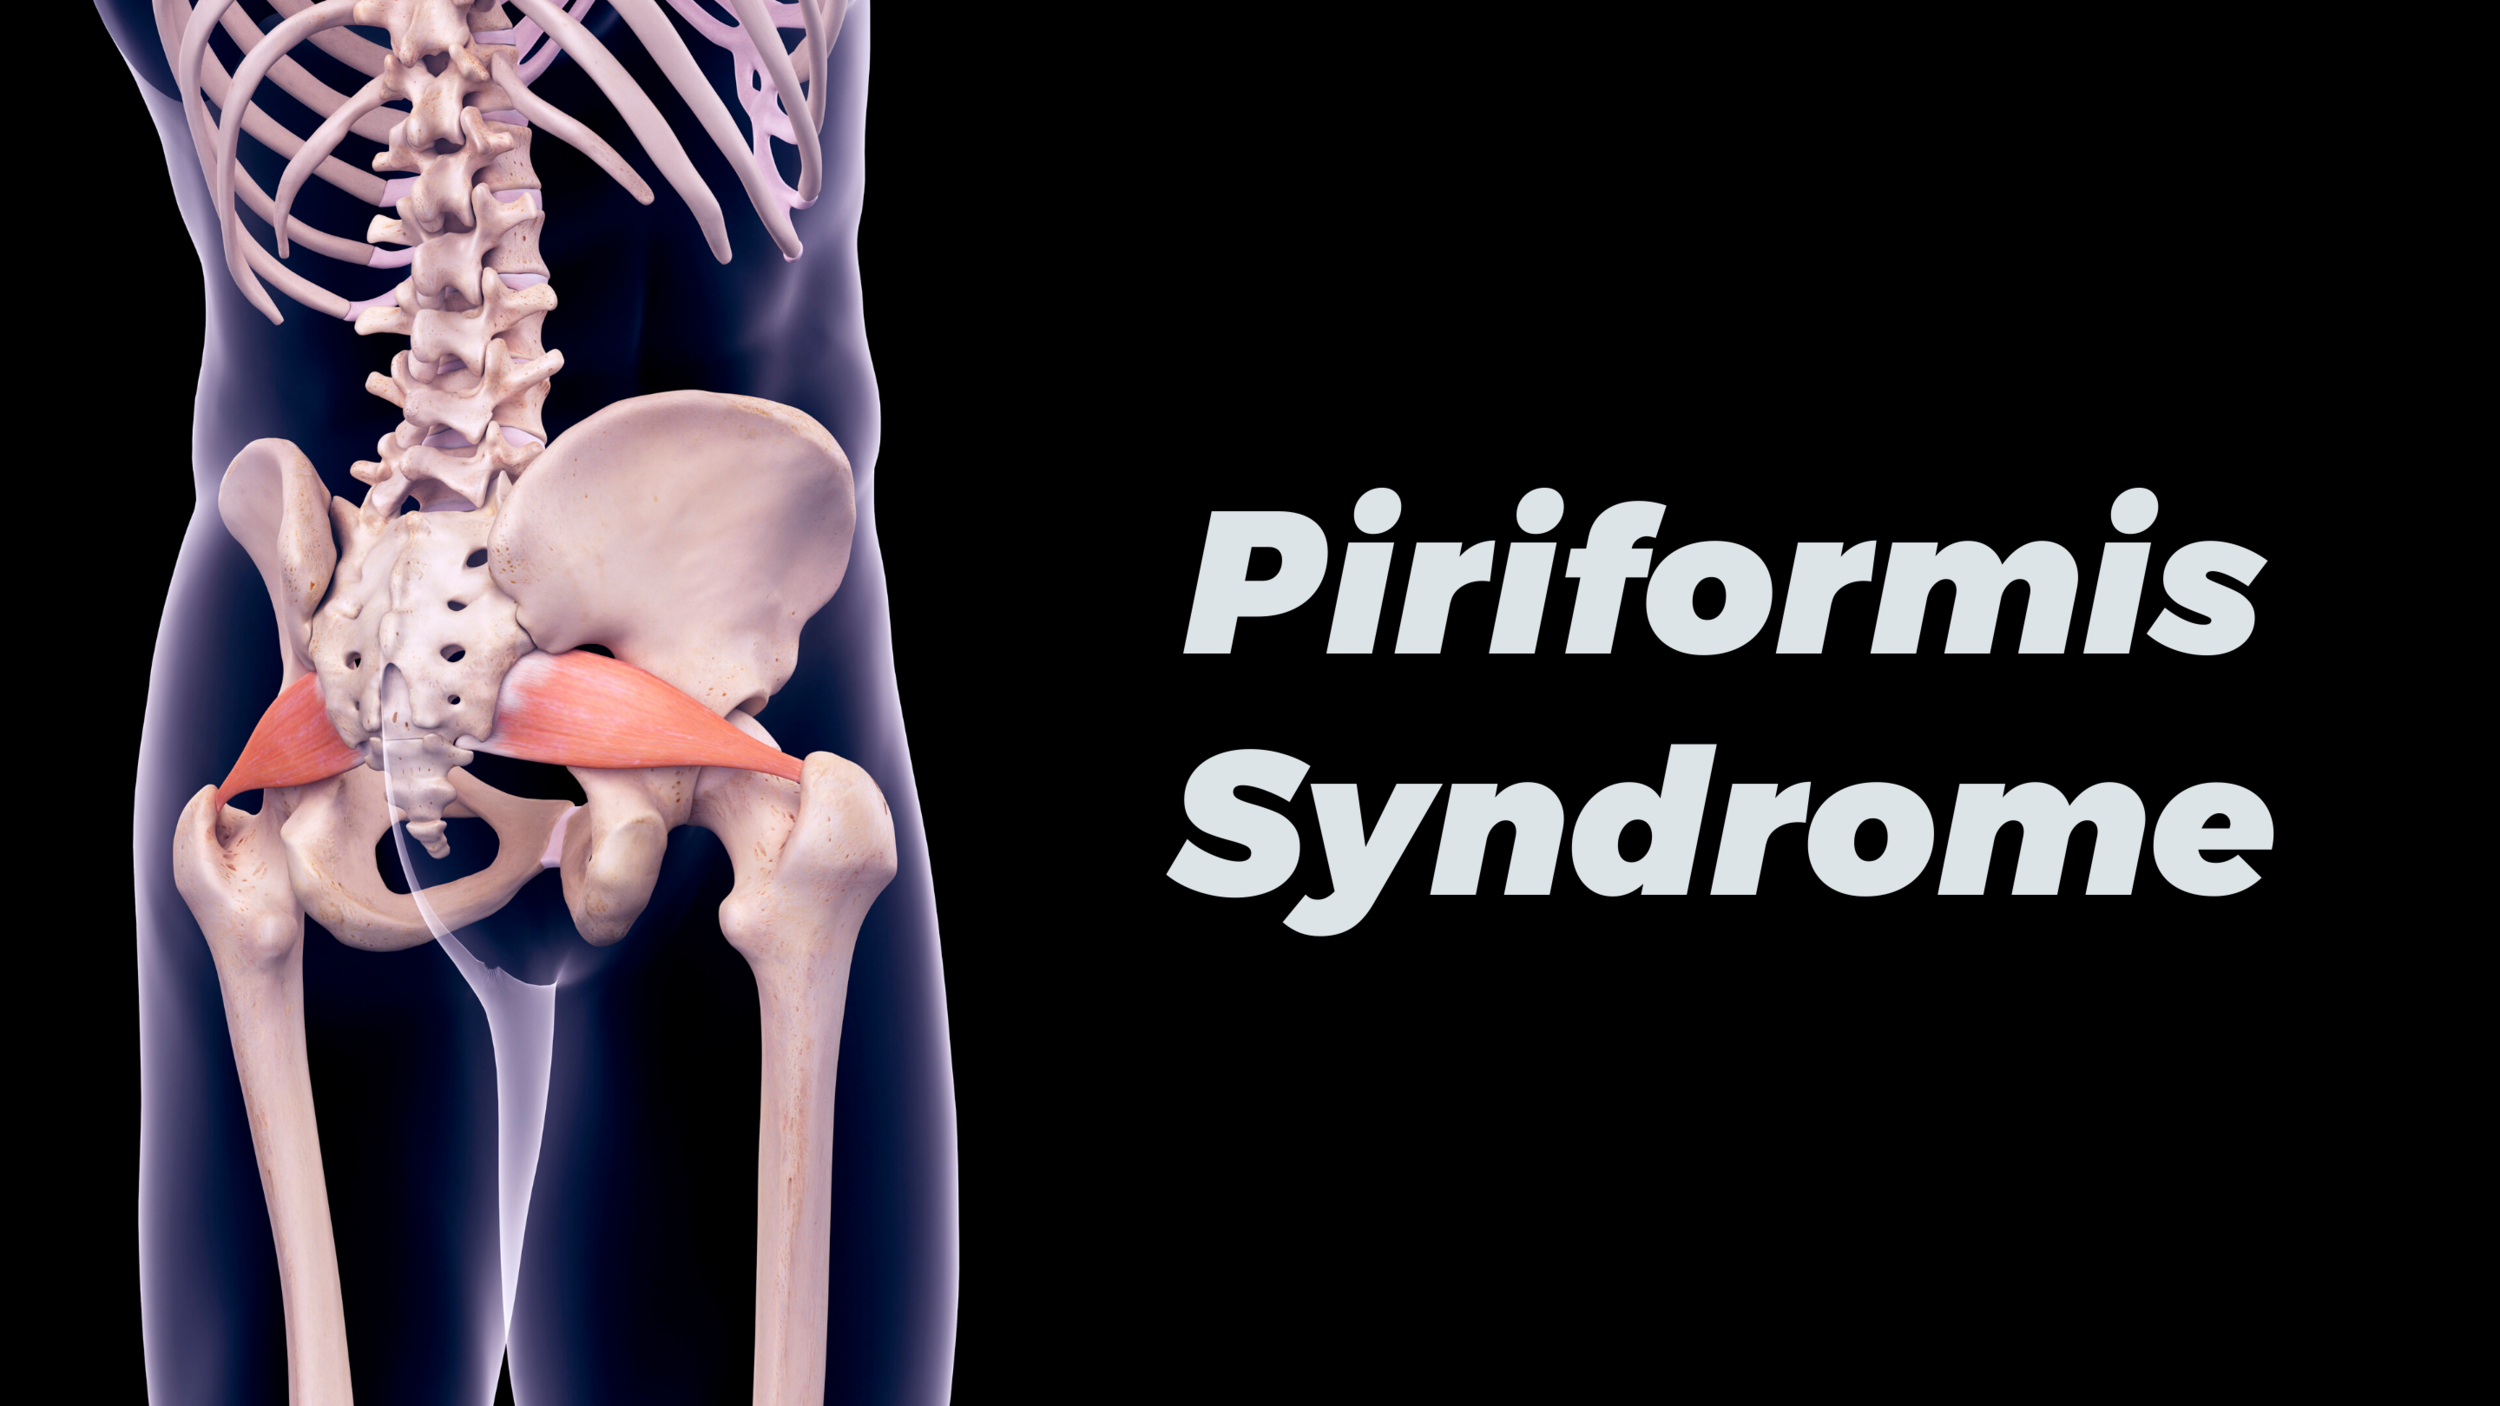 5 Effective Remedies for Piriformis Syndrome